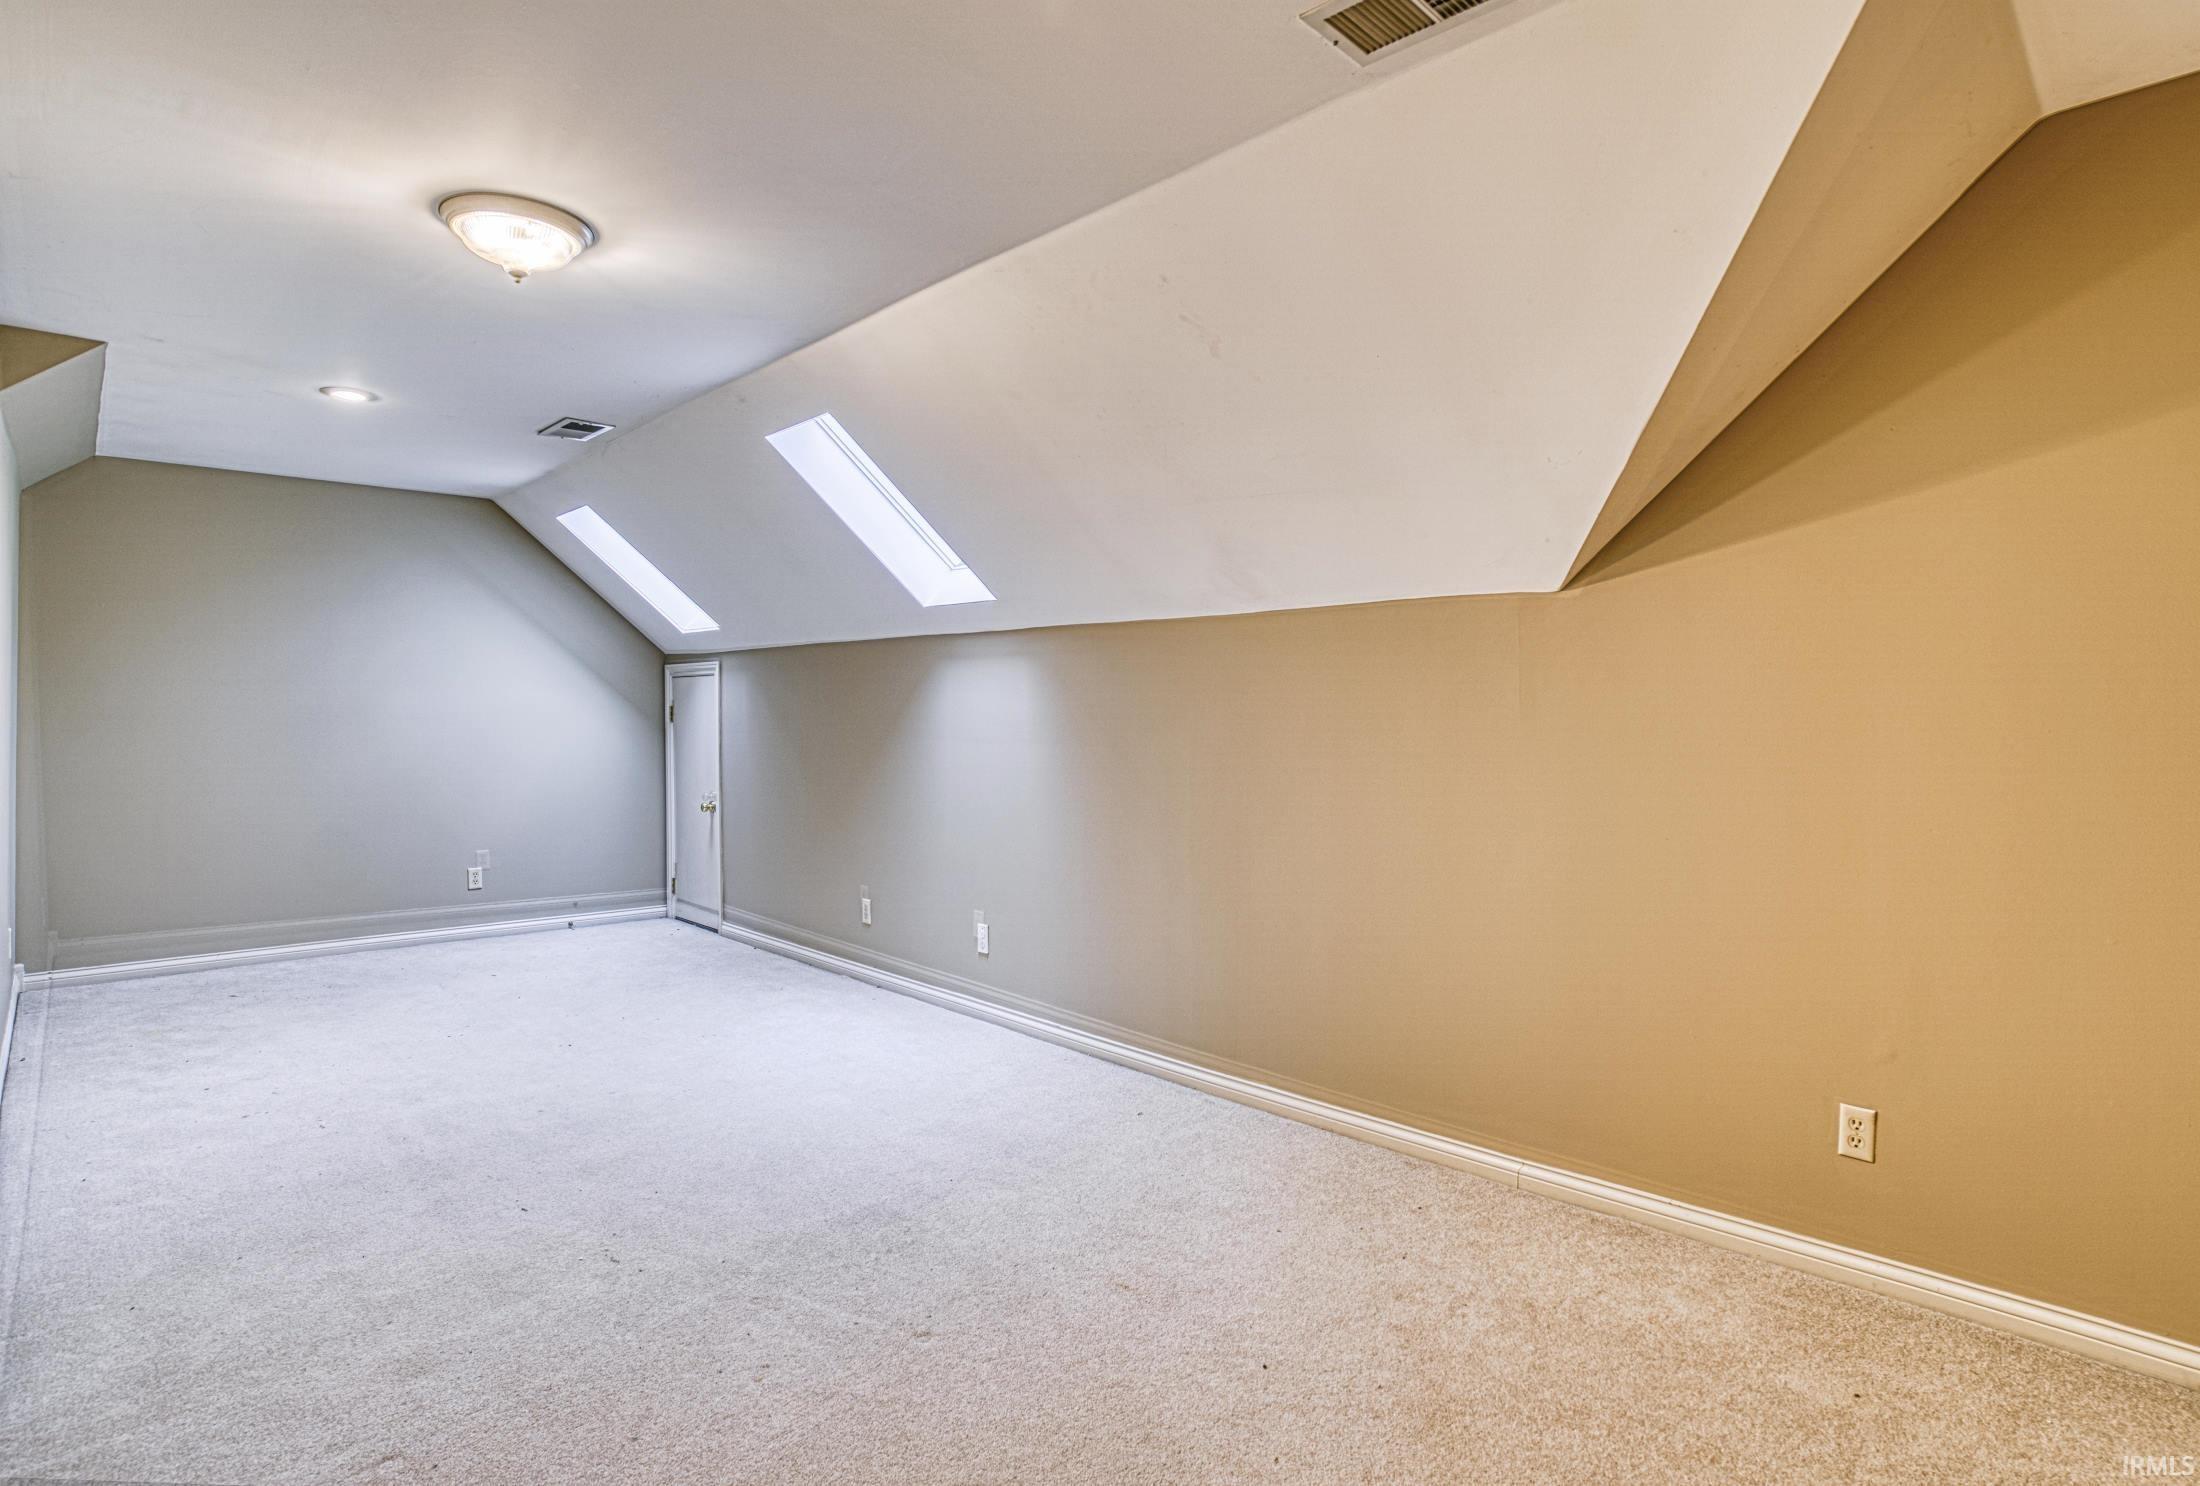 The second bonus room is a perfect flex room for exercise and play.